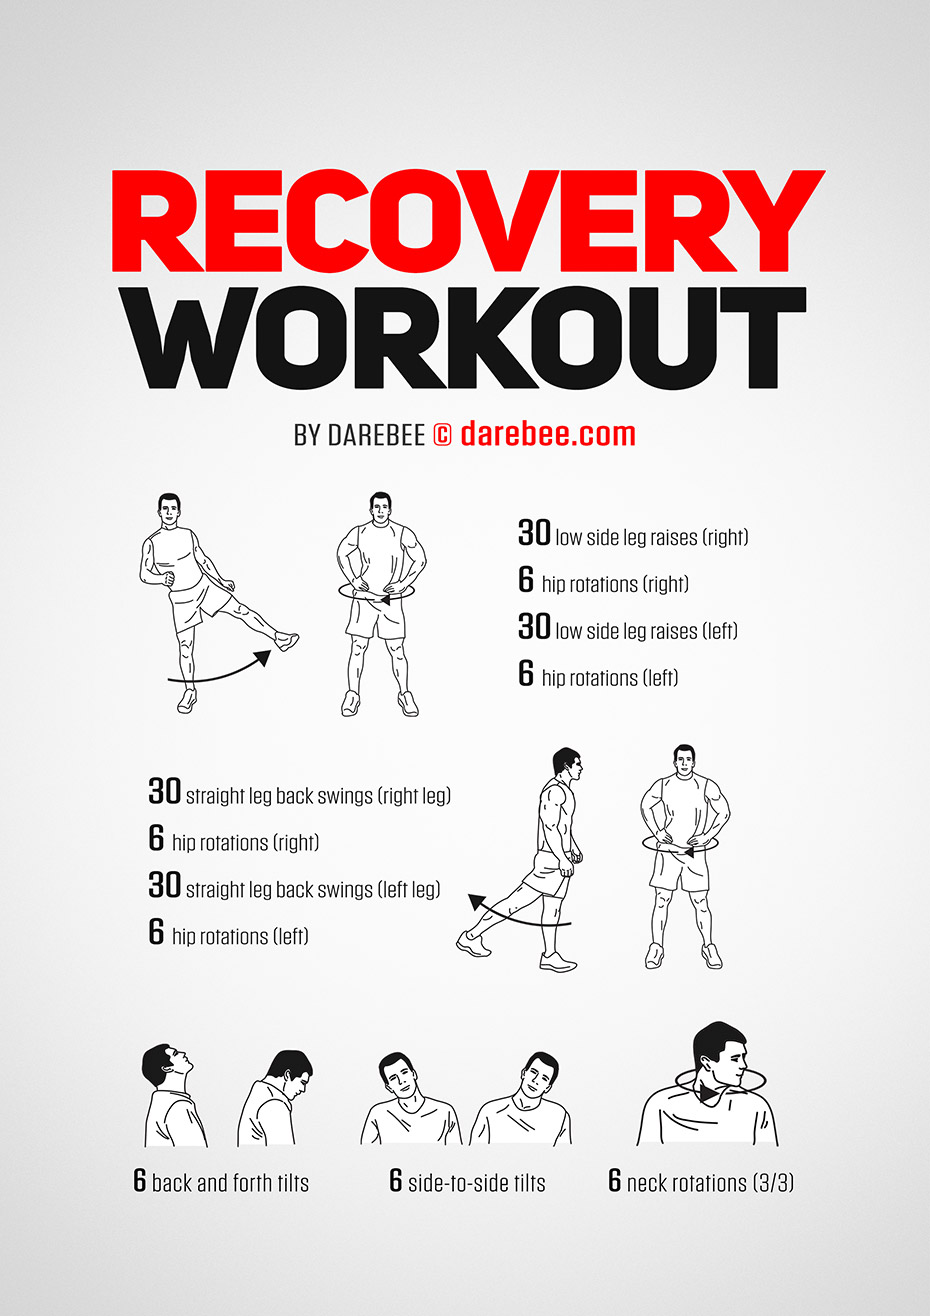 Should You Work Out When Sore? Active Recovery Explained - GoodRx